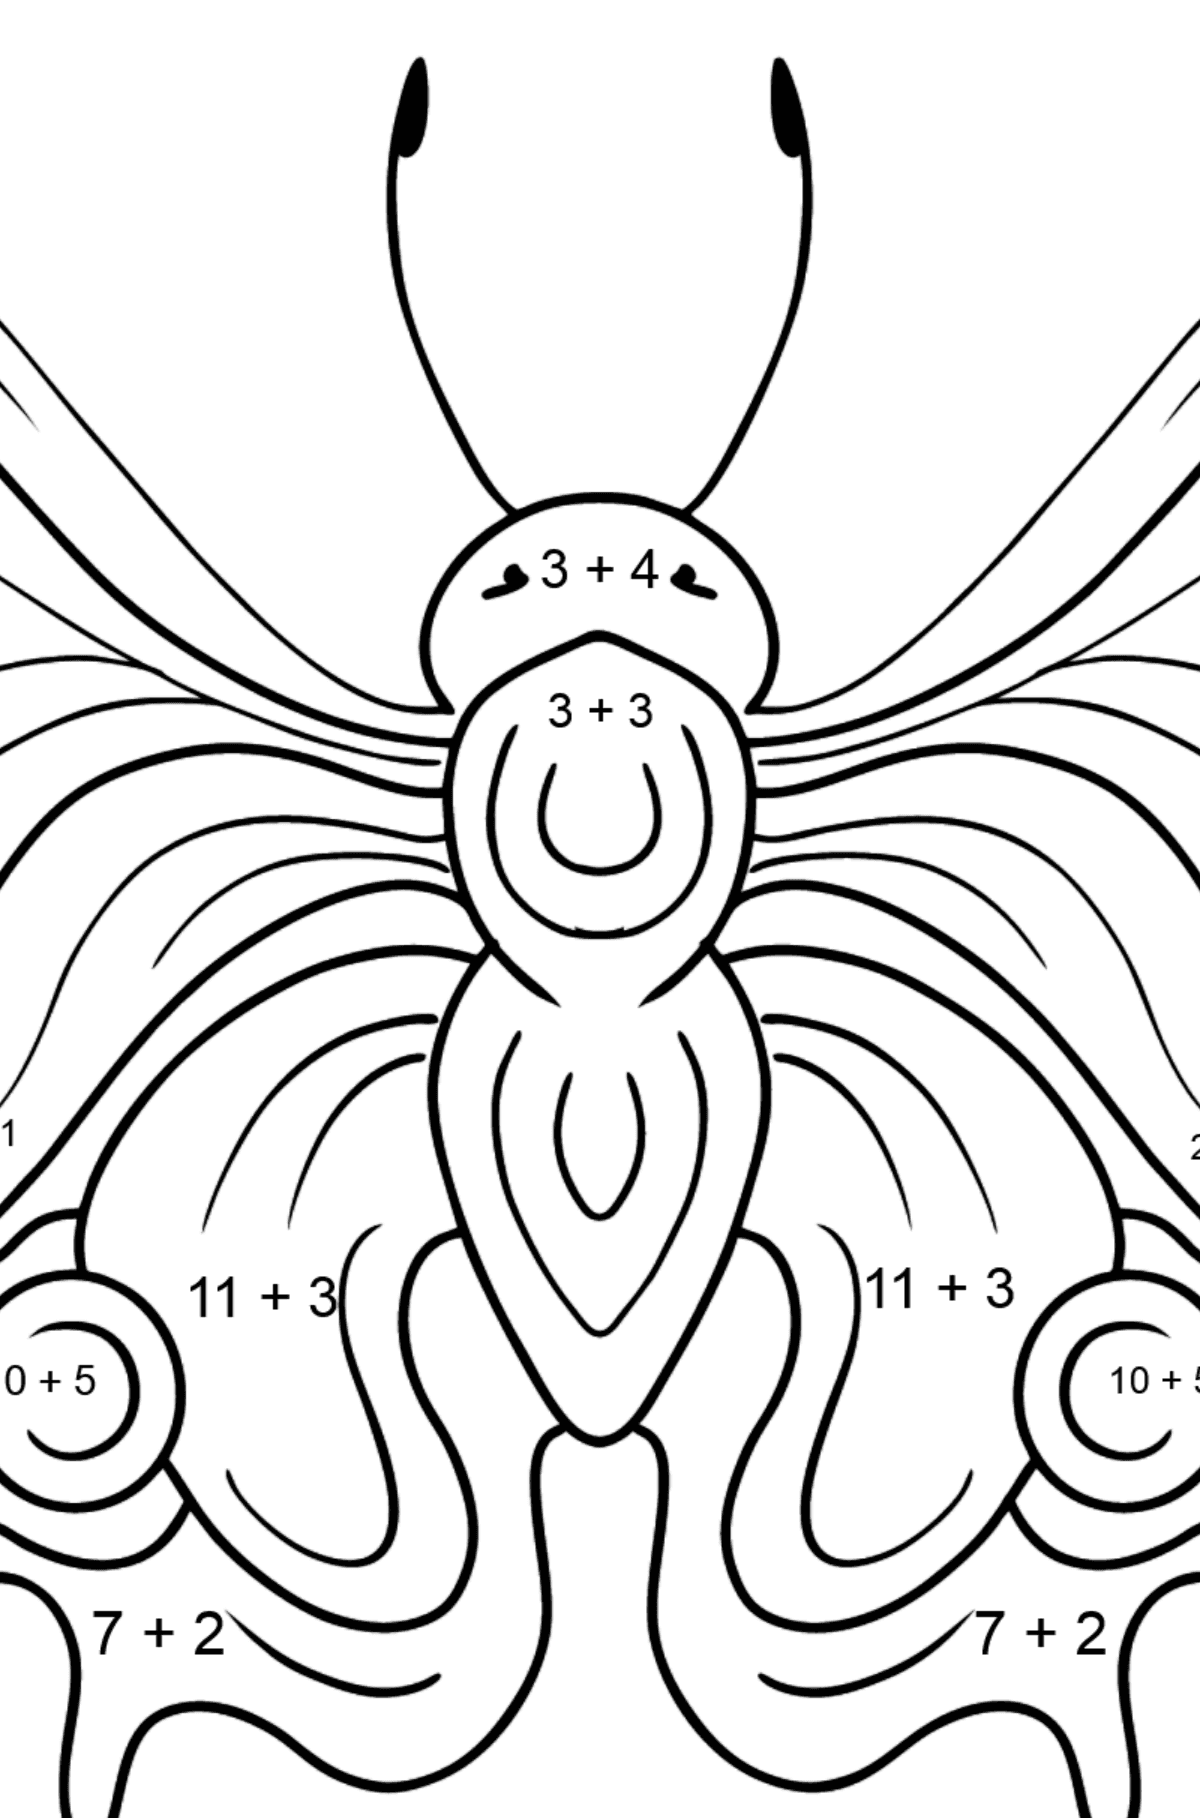 Peacock Butterfly coloring page - Math Coloring - Addition for Kids